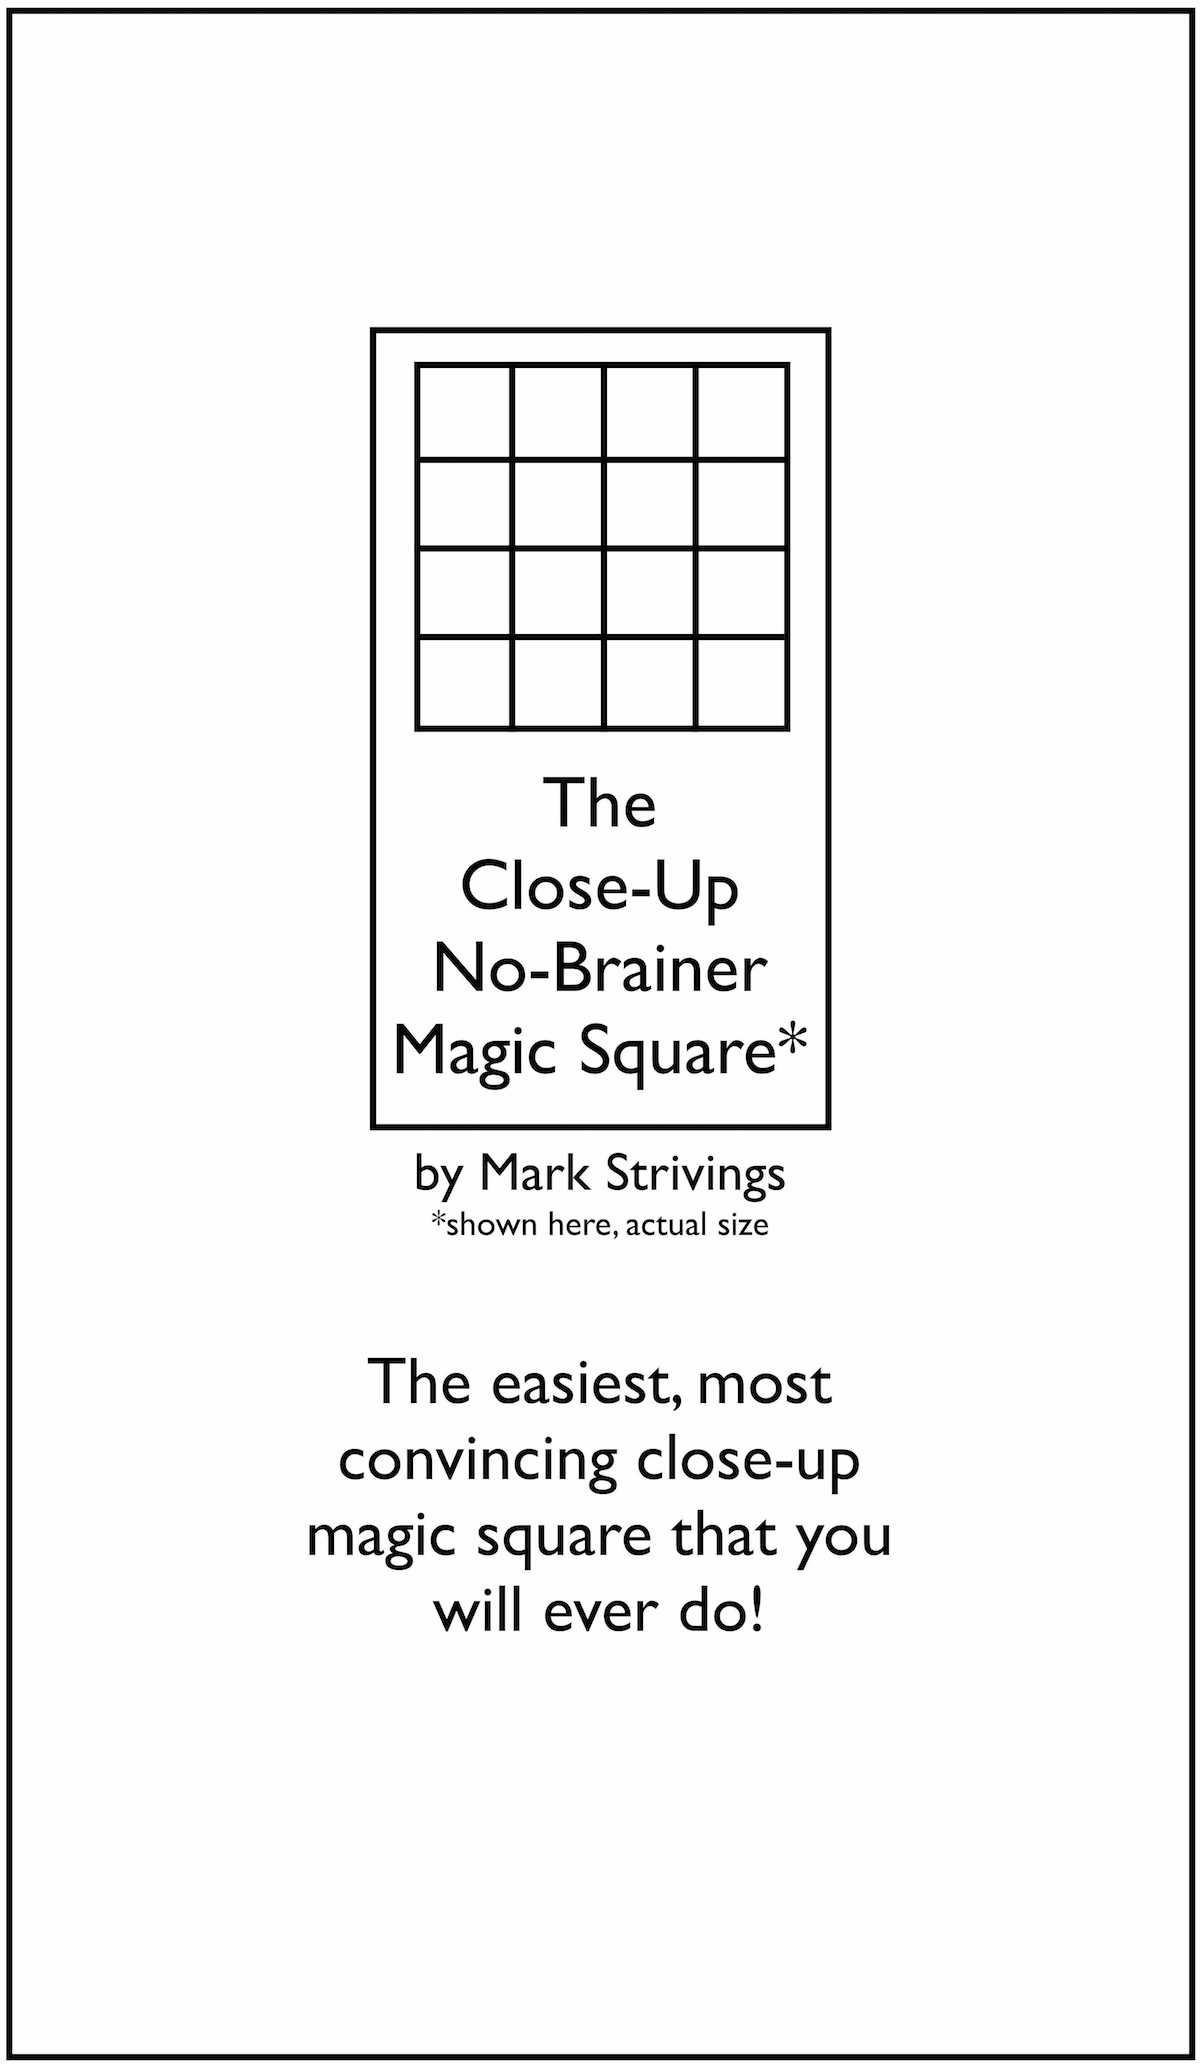 Mark Strivings - The Close-Up No-Brainer Magic Square